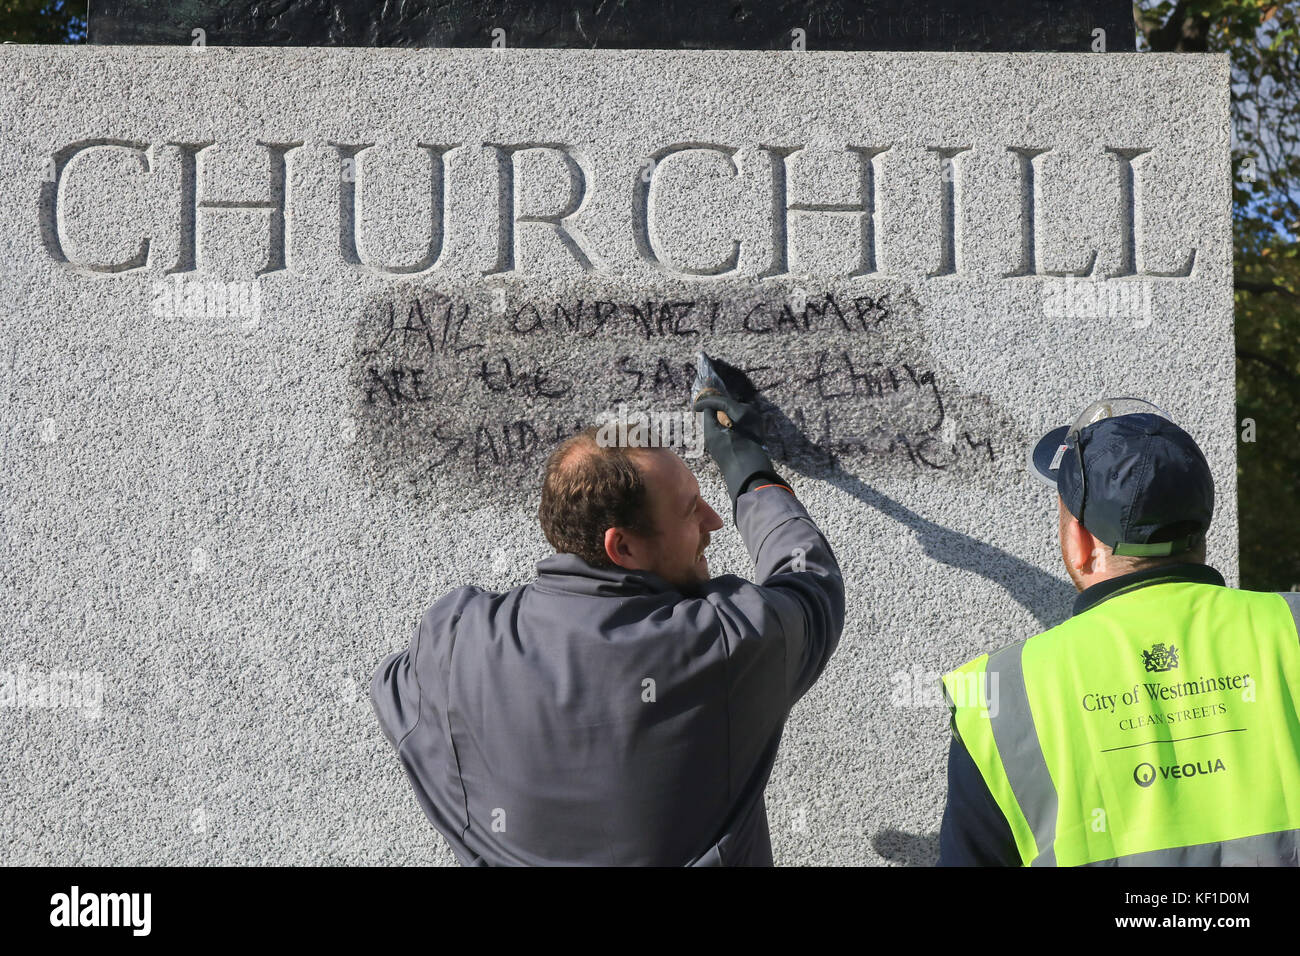 London, UK. 25th Oct, 2017. Westminster council Anti Graffiti unit wash and clean the Graffiti with the writing  still legible  ''Jail and Nazi camps are the same thing'  on the statue of Sir Winston Churchill opposite the Palace of Westminster left by Calais Jungle protesters the previous day. Credit: amer ghazzal/Alamy Live News Stock Photo